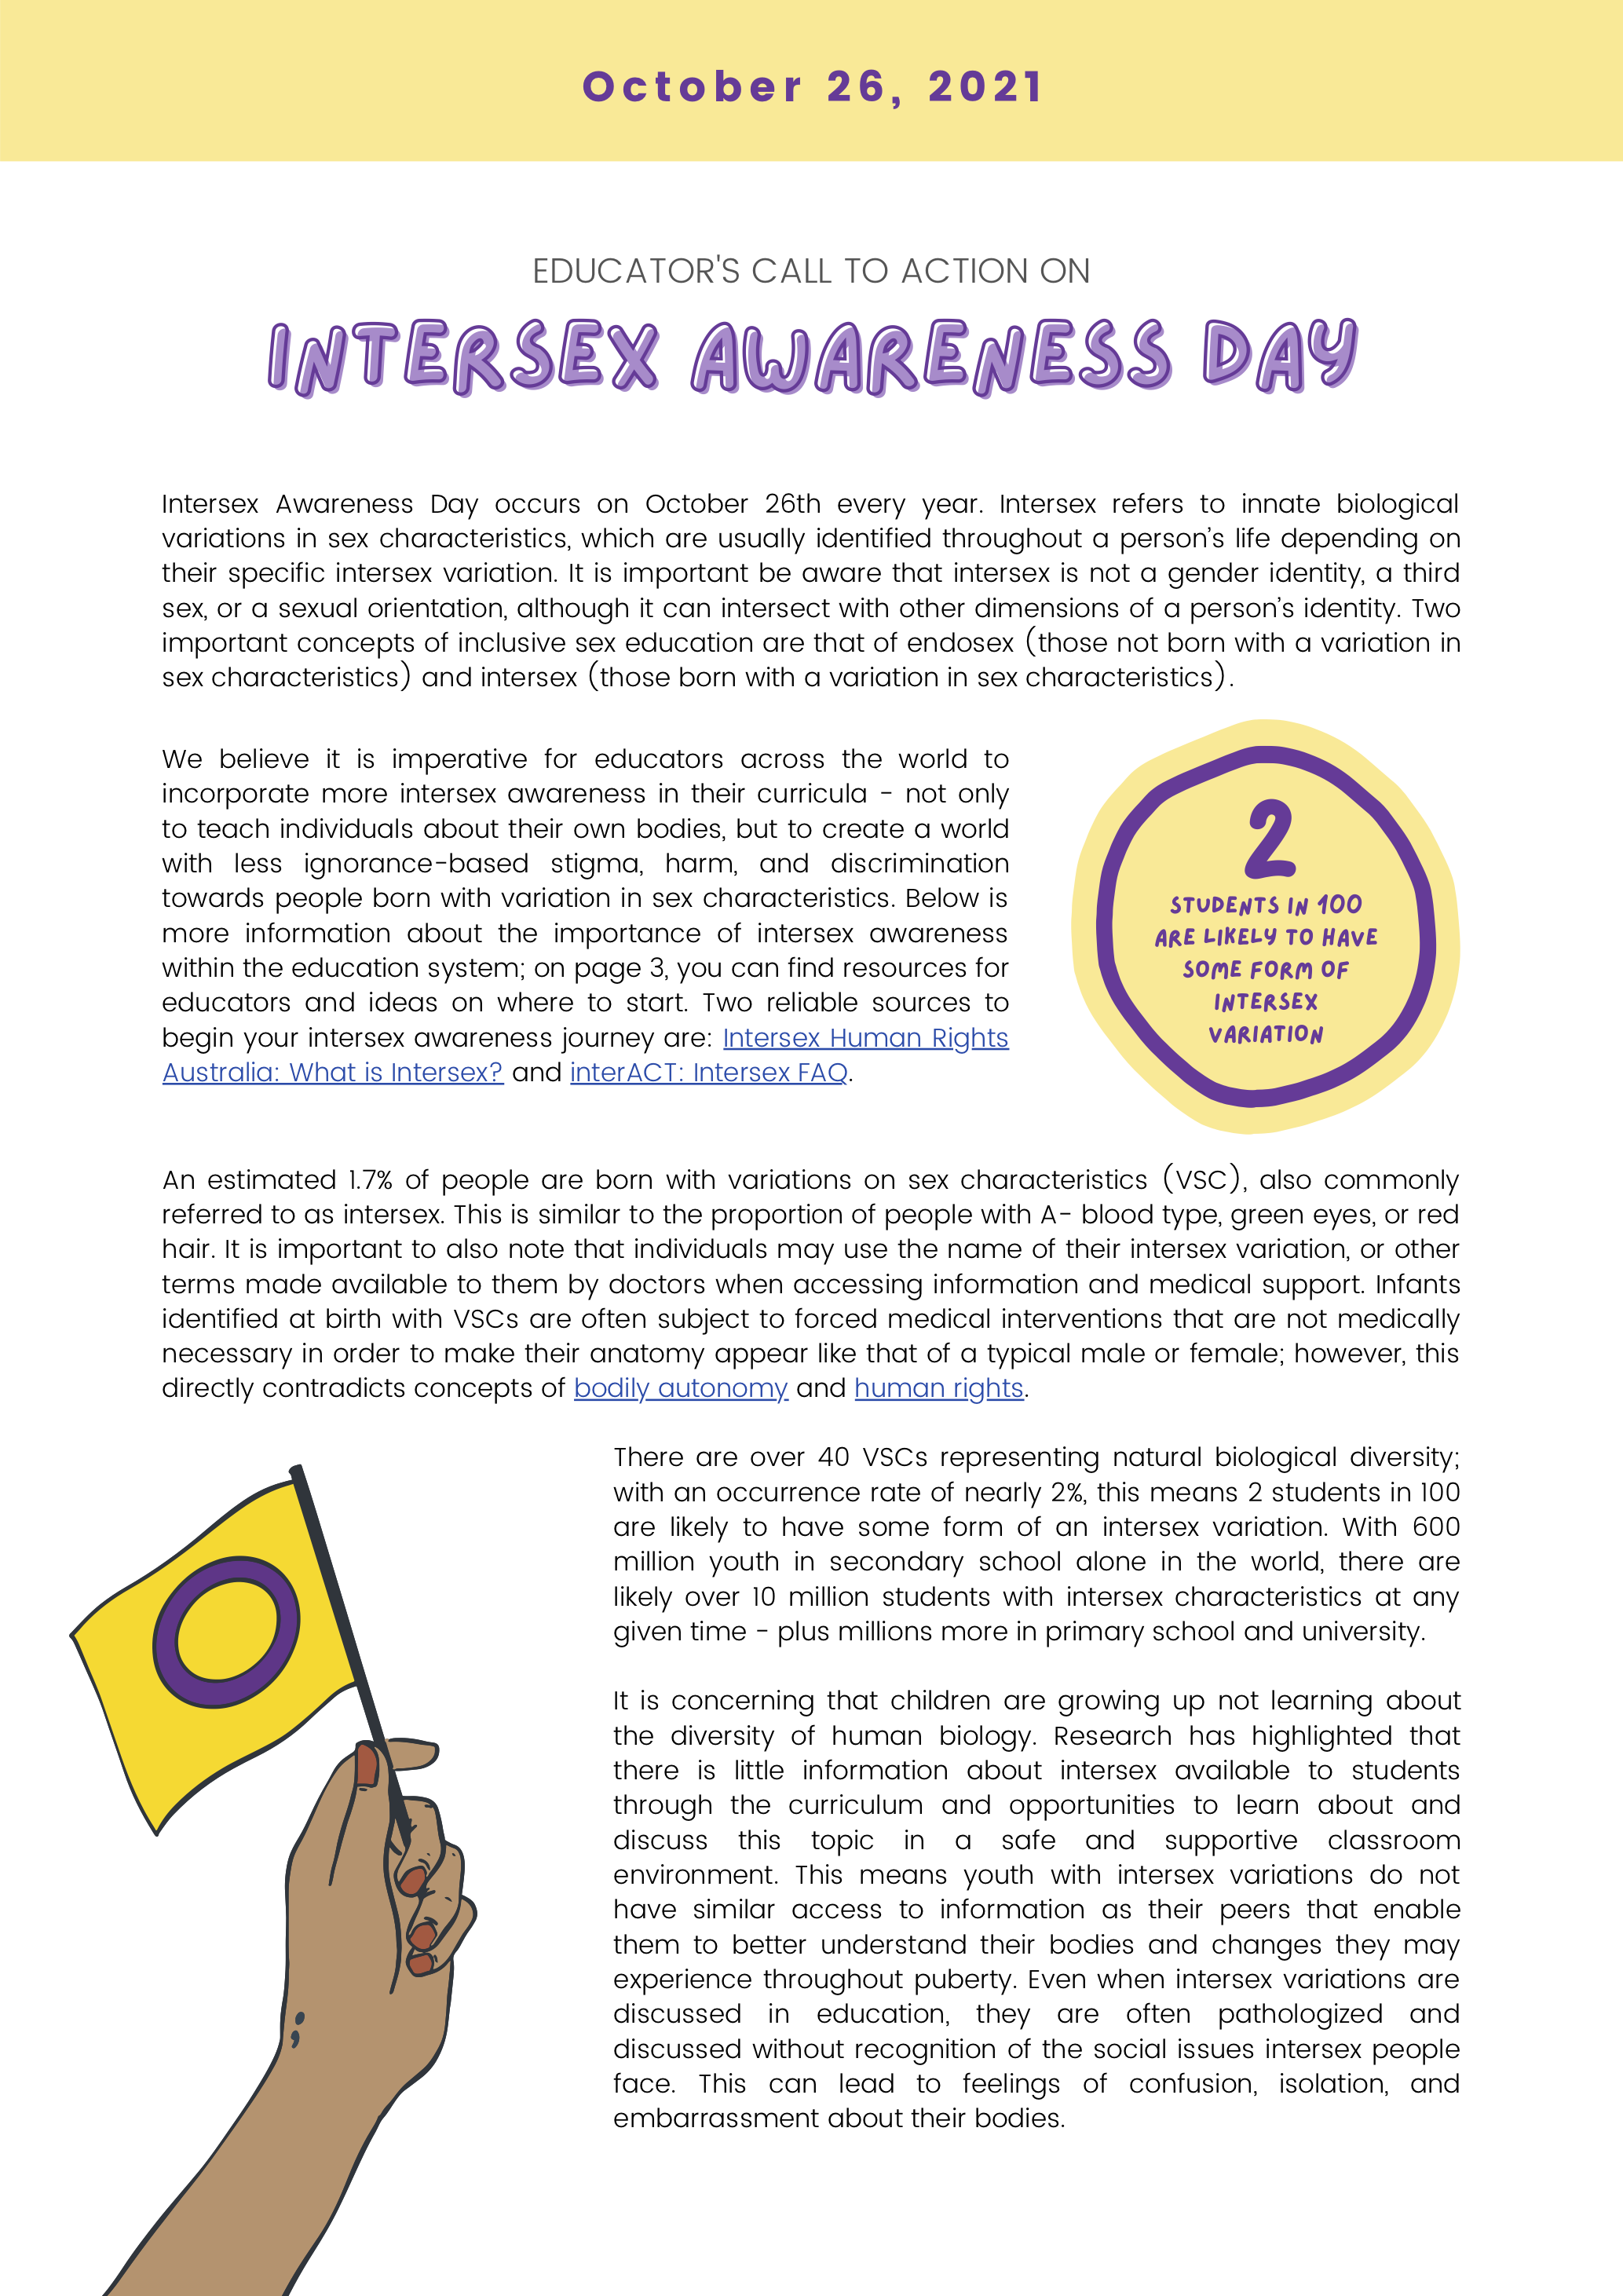 Intersex Awareness - Education Advocacy 10.26.21 (dragged).png